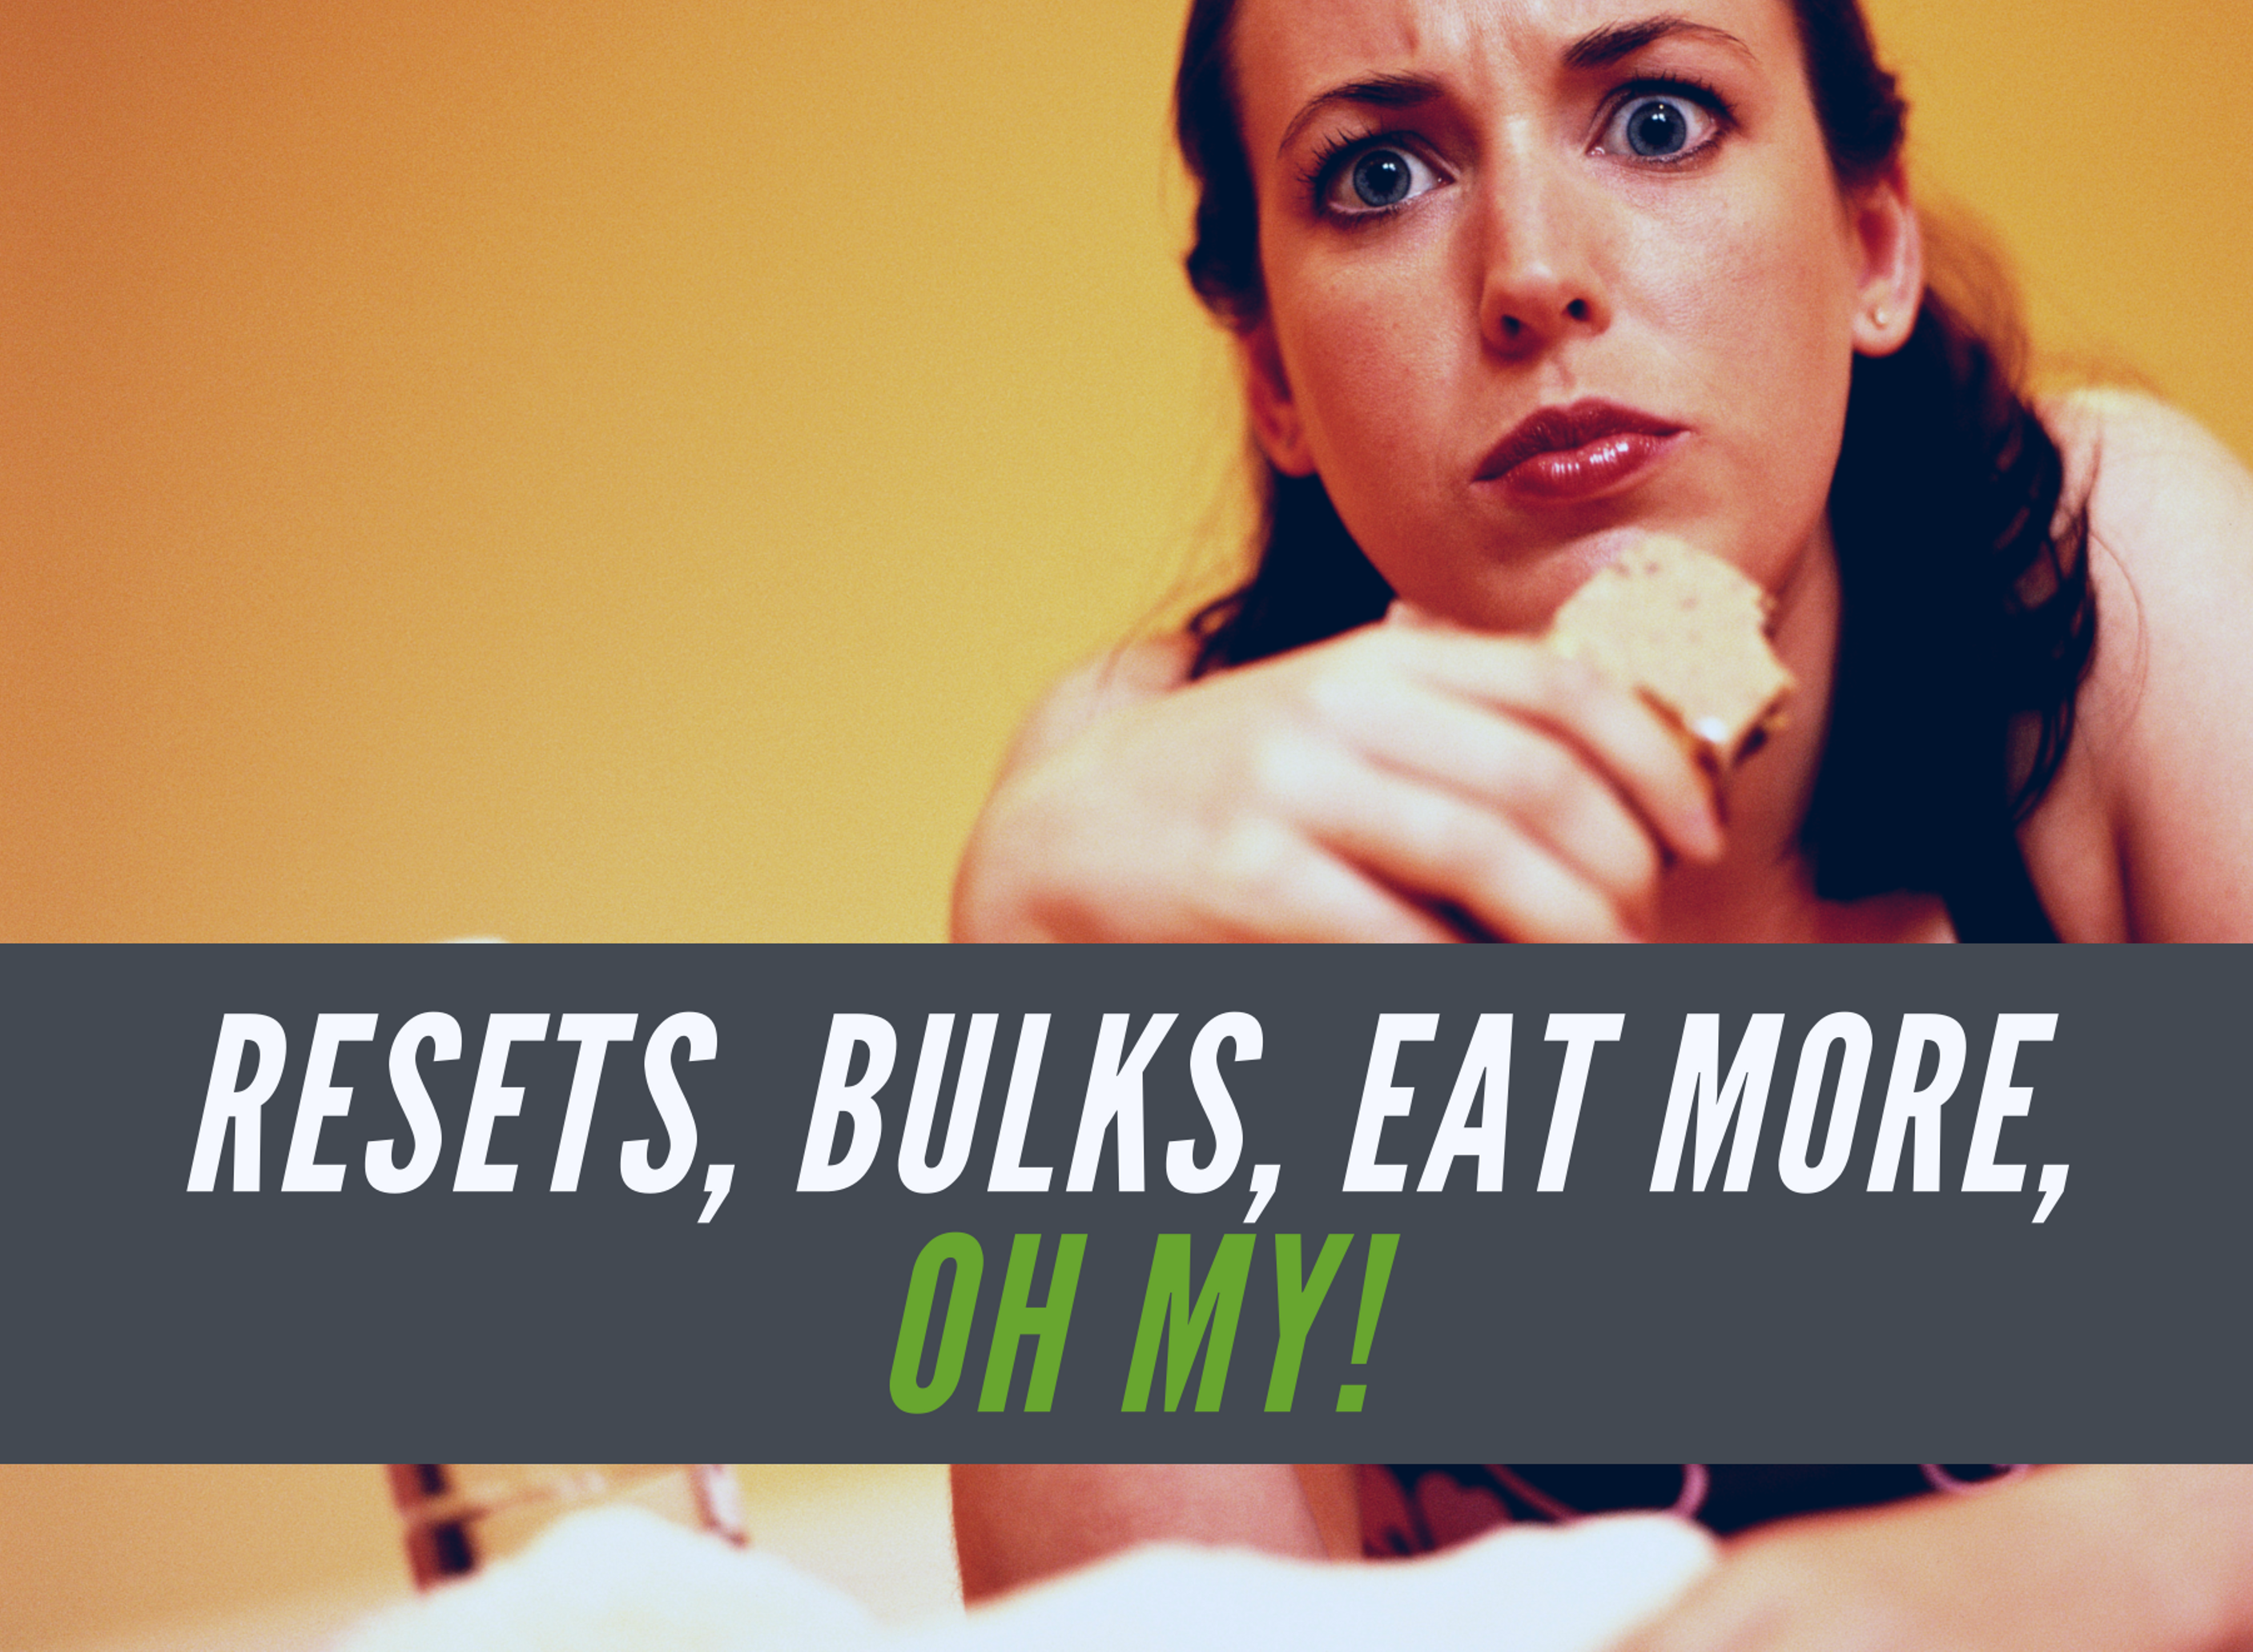 Resets, bulks, eat more, oh my!